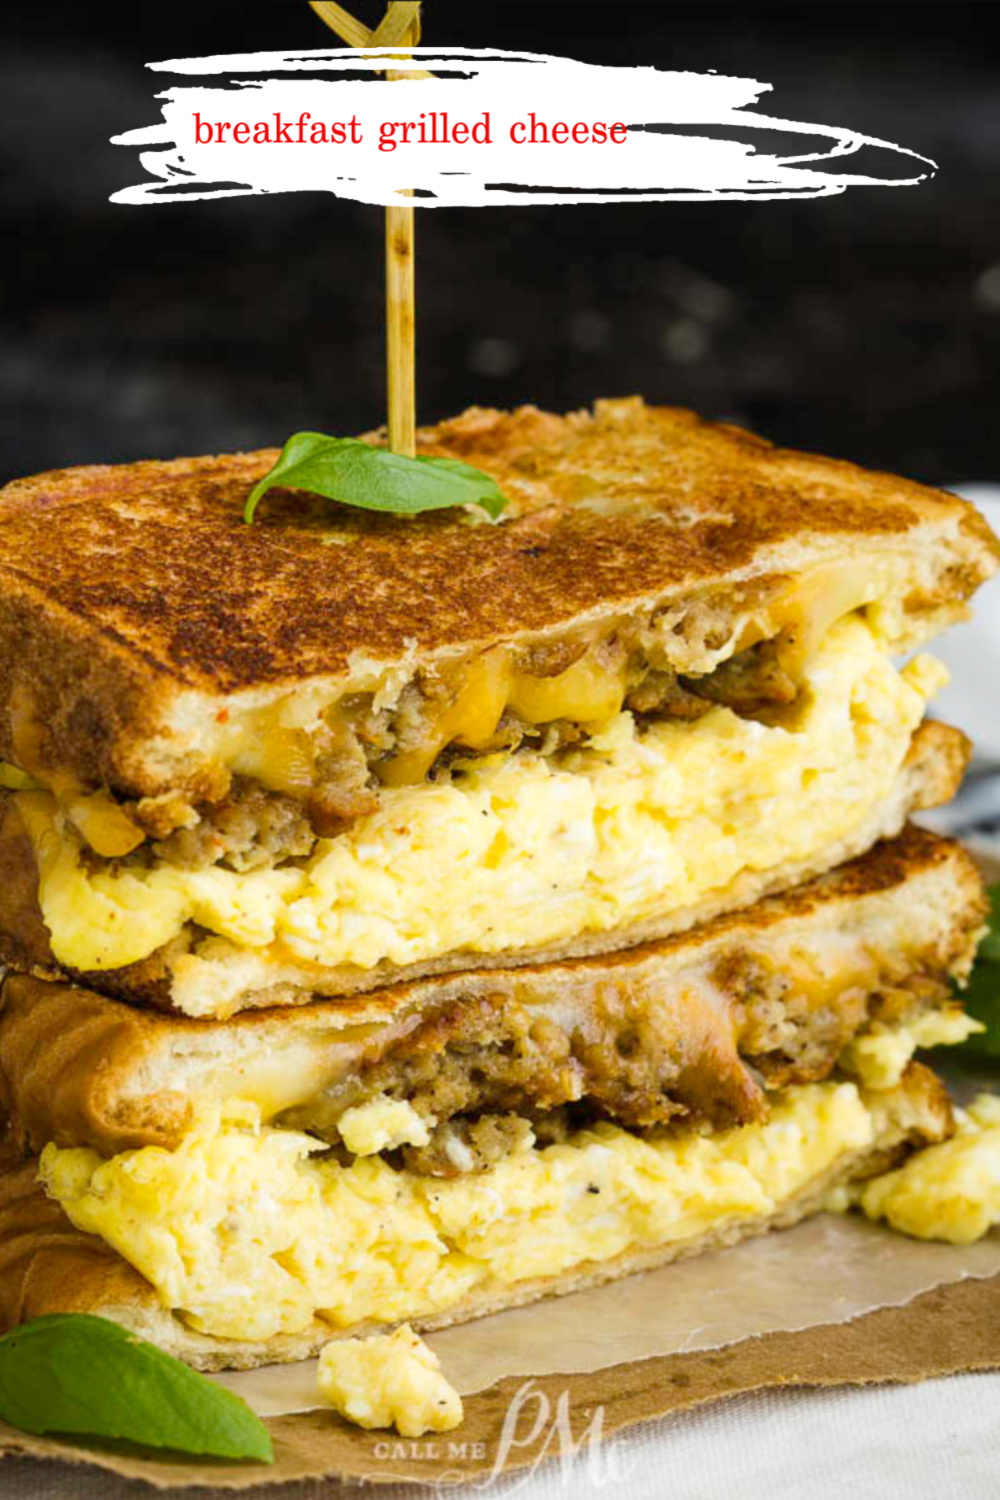 Egg, Sausage, and Cheese Breakfast Sandwich - The Local Palate